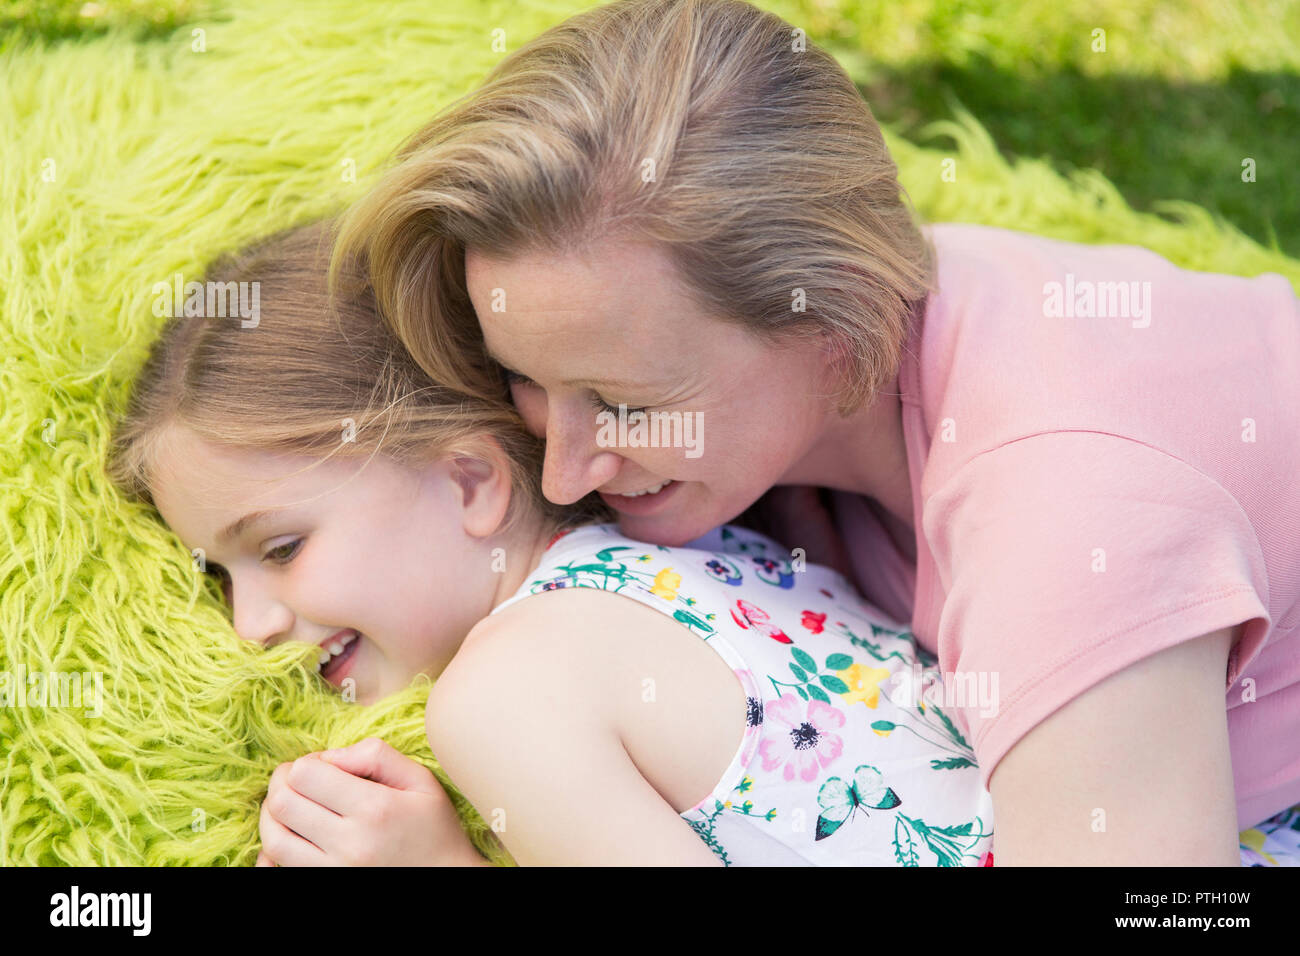 Affectionate mother and daughter Stock Photo